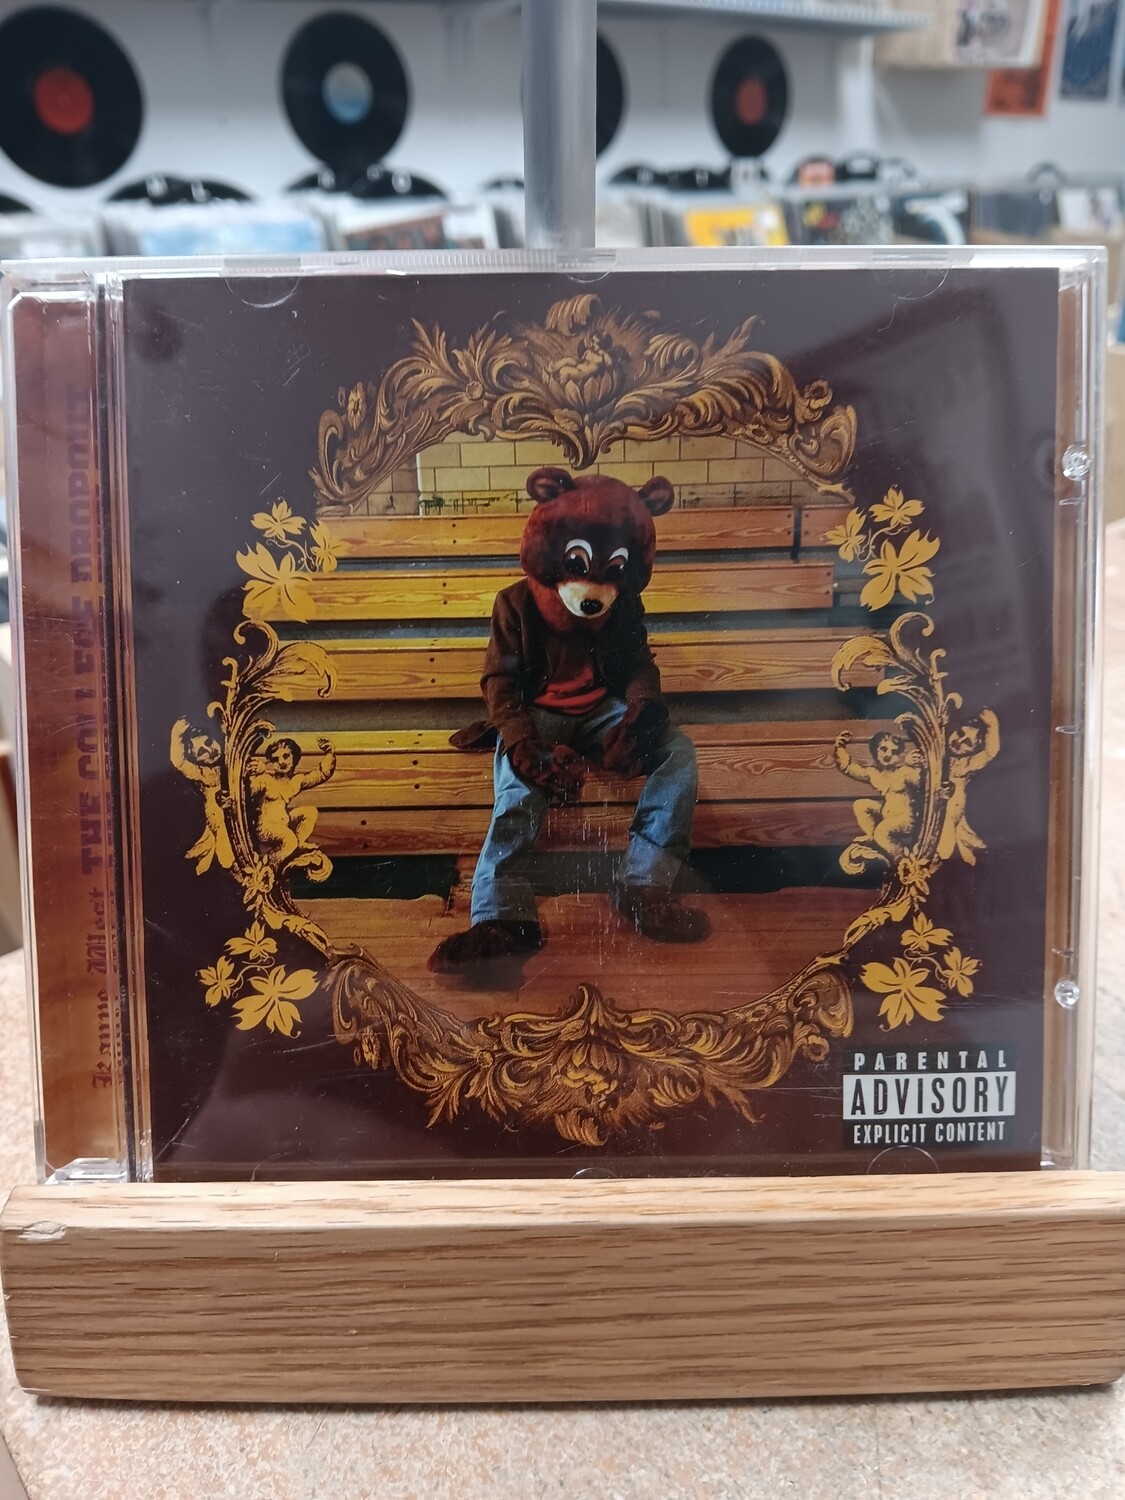 Kanye West - The College Dropout (CD)